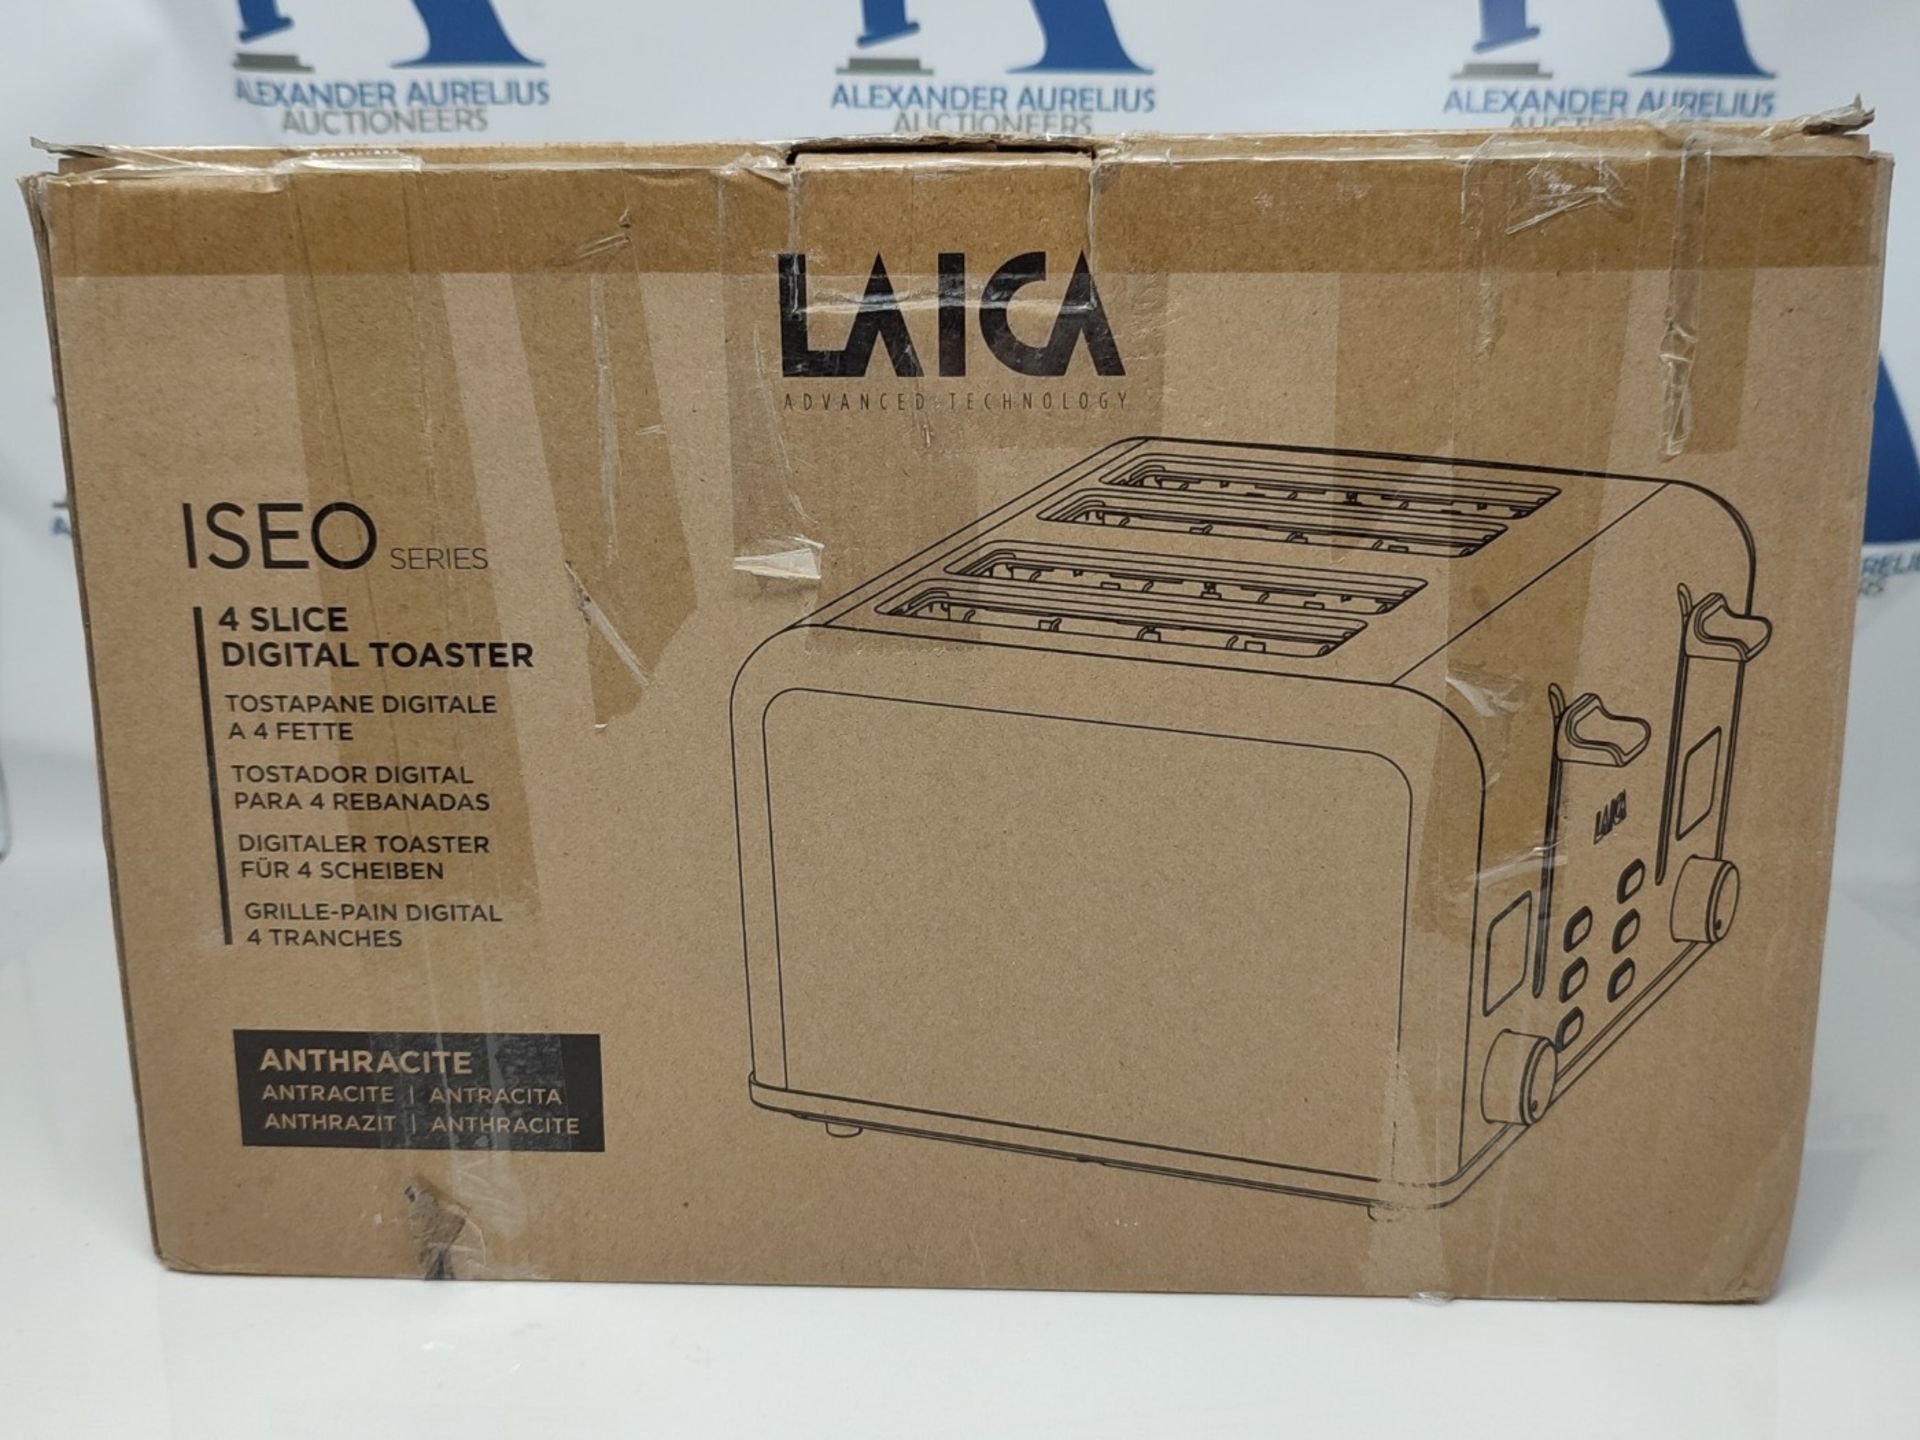 LAICA ISEO 4 slice digital toaster with Independent High Lift & Extra-Wide Slots, Defr - Image 2 of 2